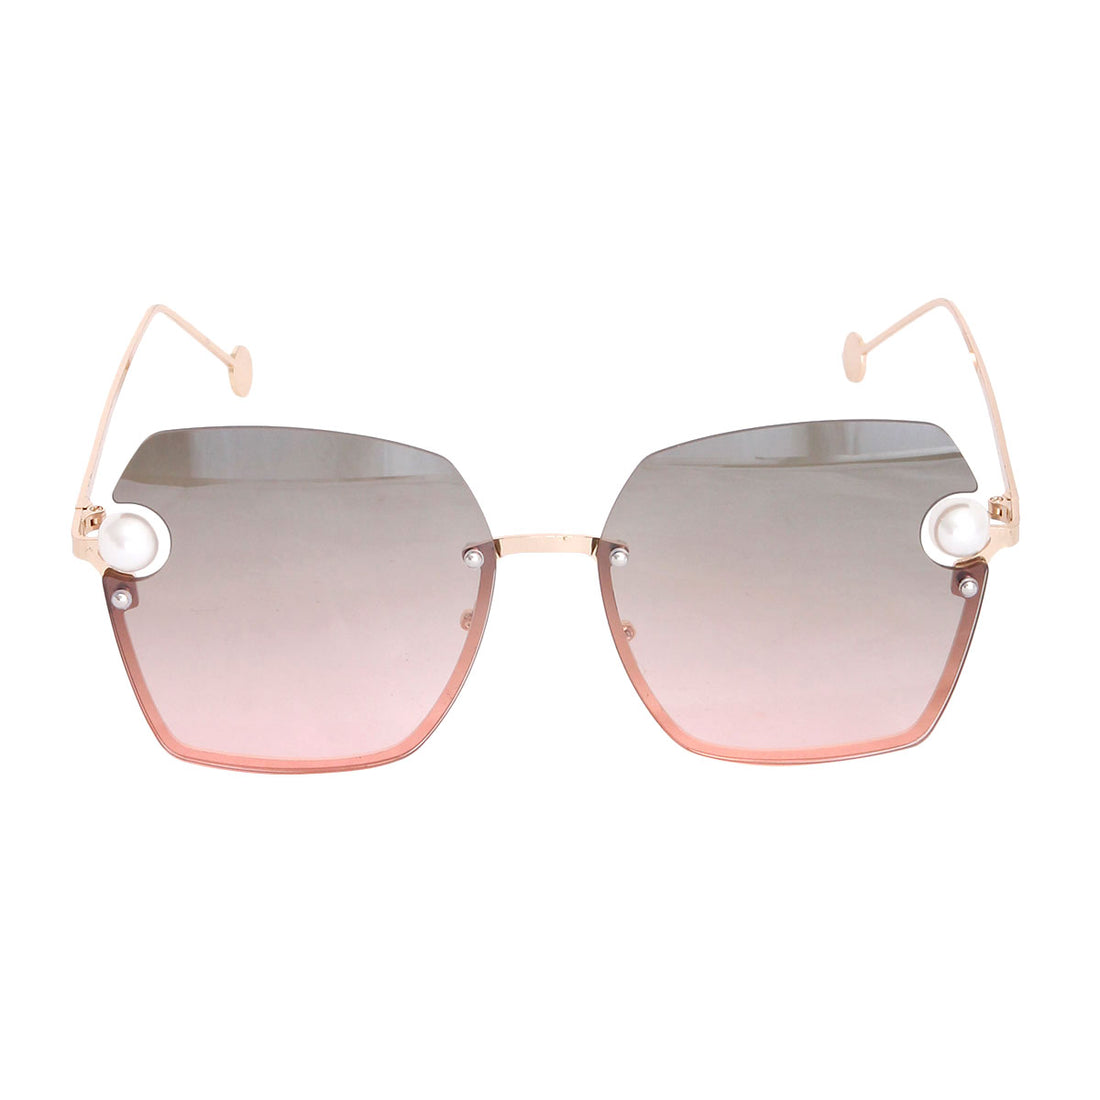 Green to Pink Pearl Sunglasses